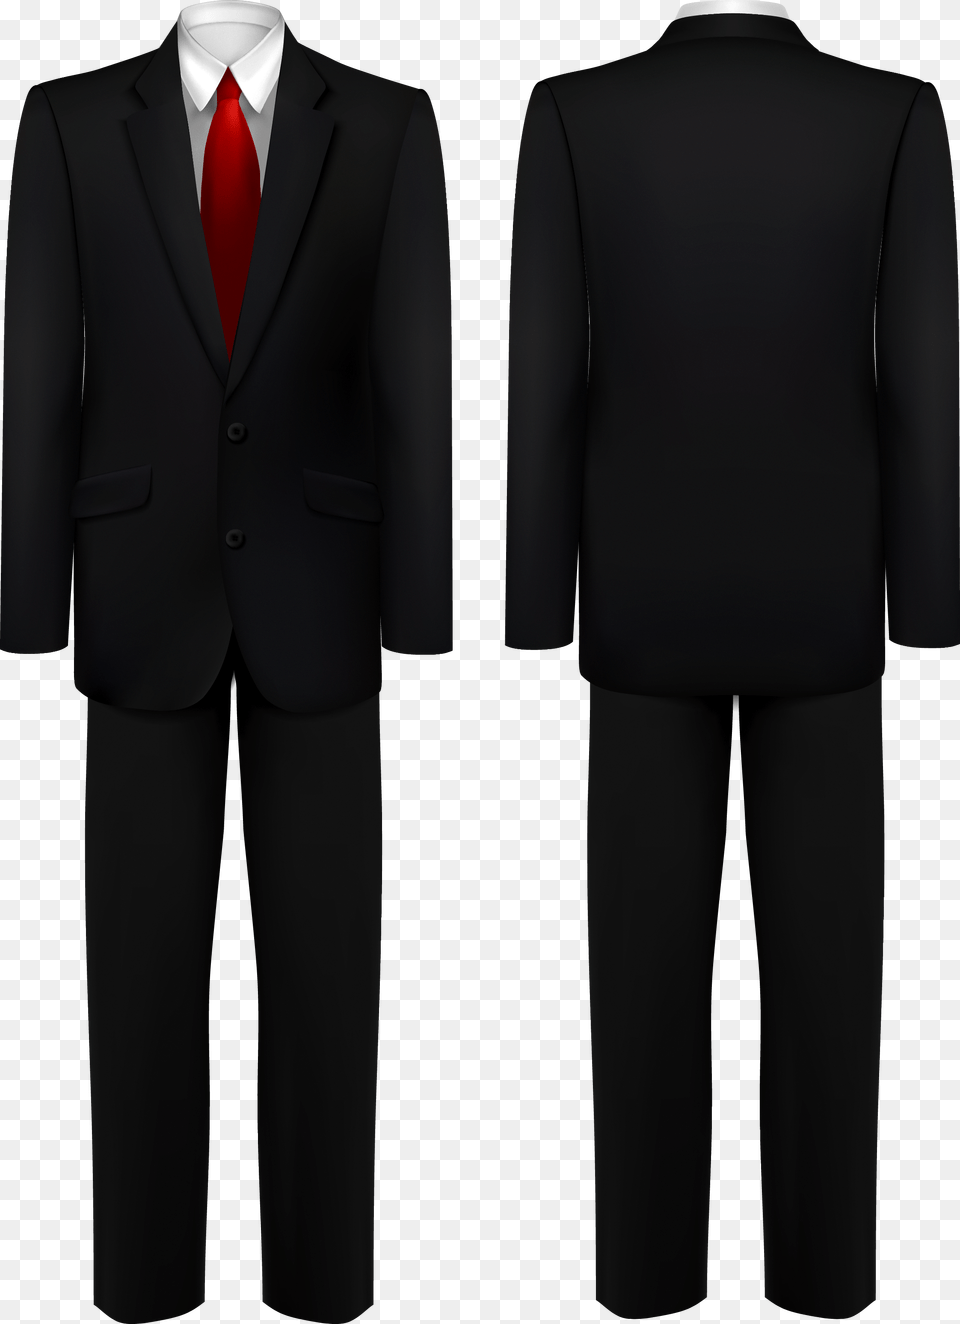 Gentleman Vector Tuxedo Suit Whole Body Formal Attire Template, Clothing, Formal Wear, Coat, Tie Free Transparent Png